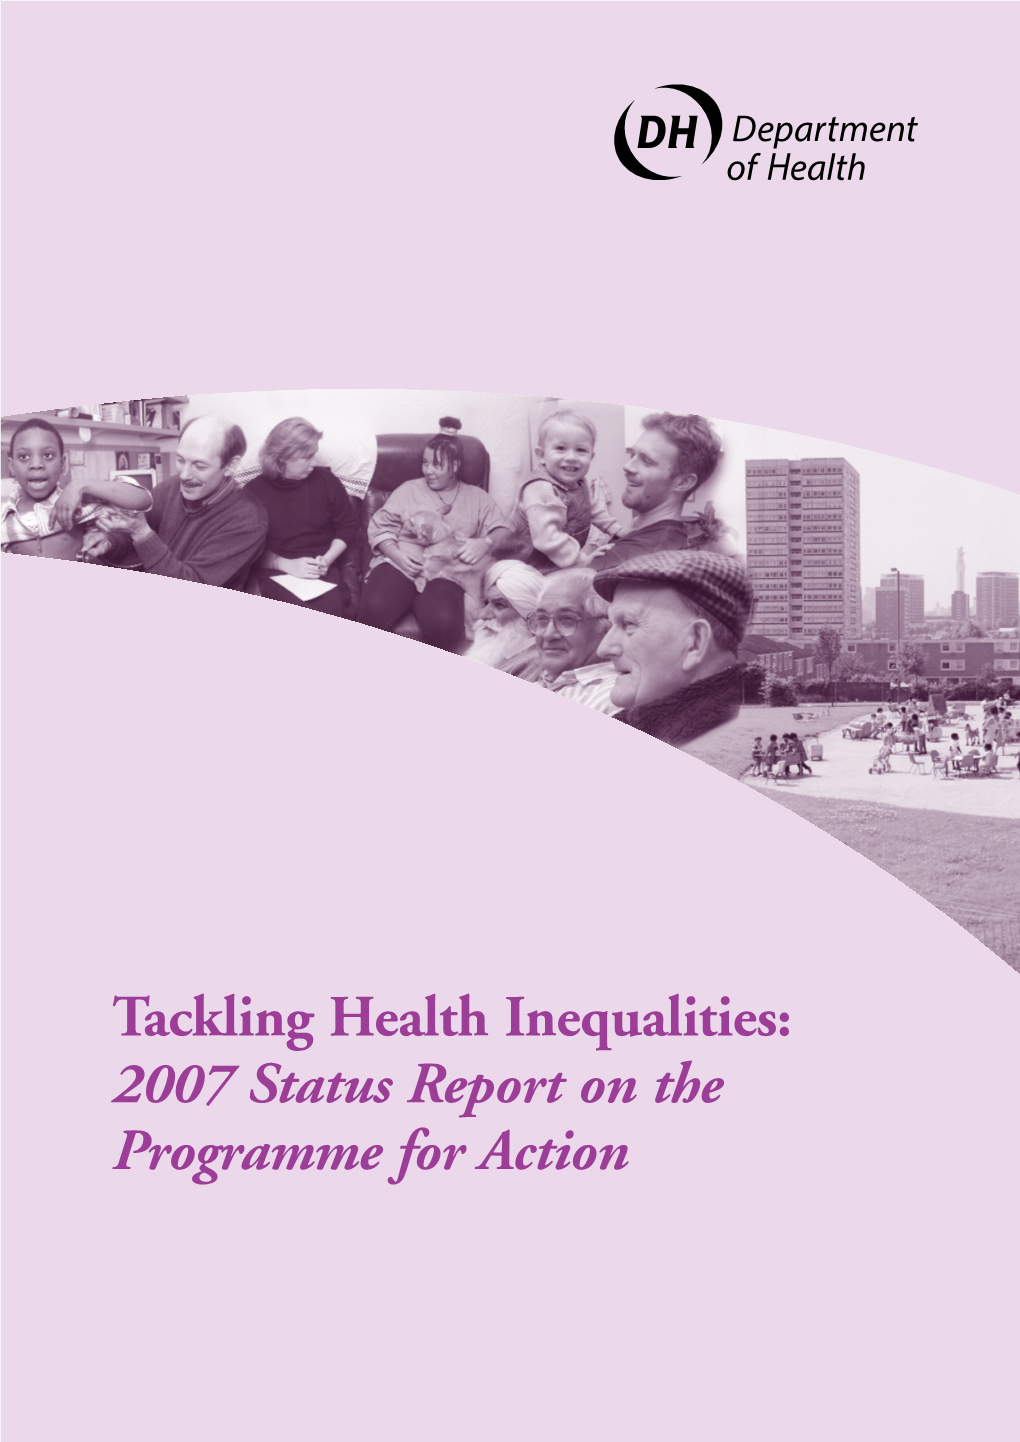 Tackling Health Inequalities: 2007 Status Report on the Programme For